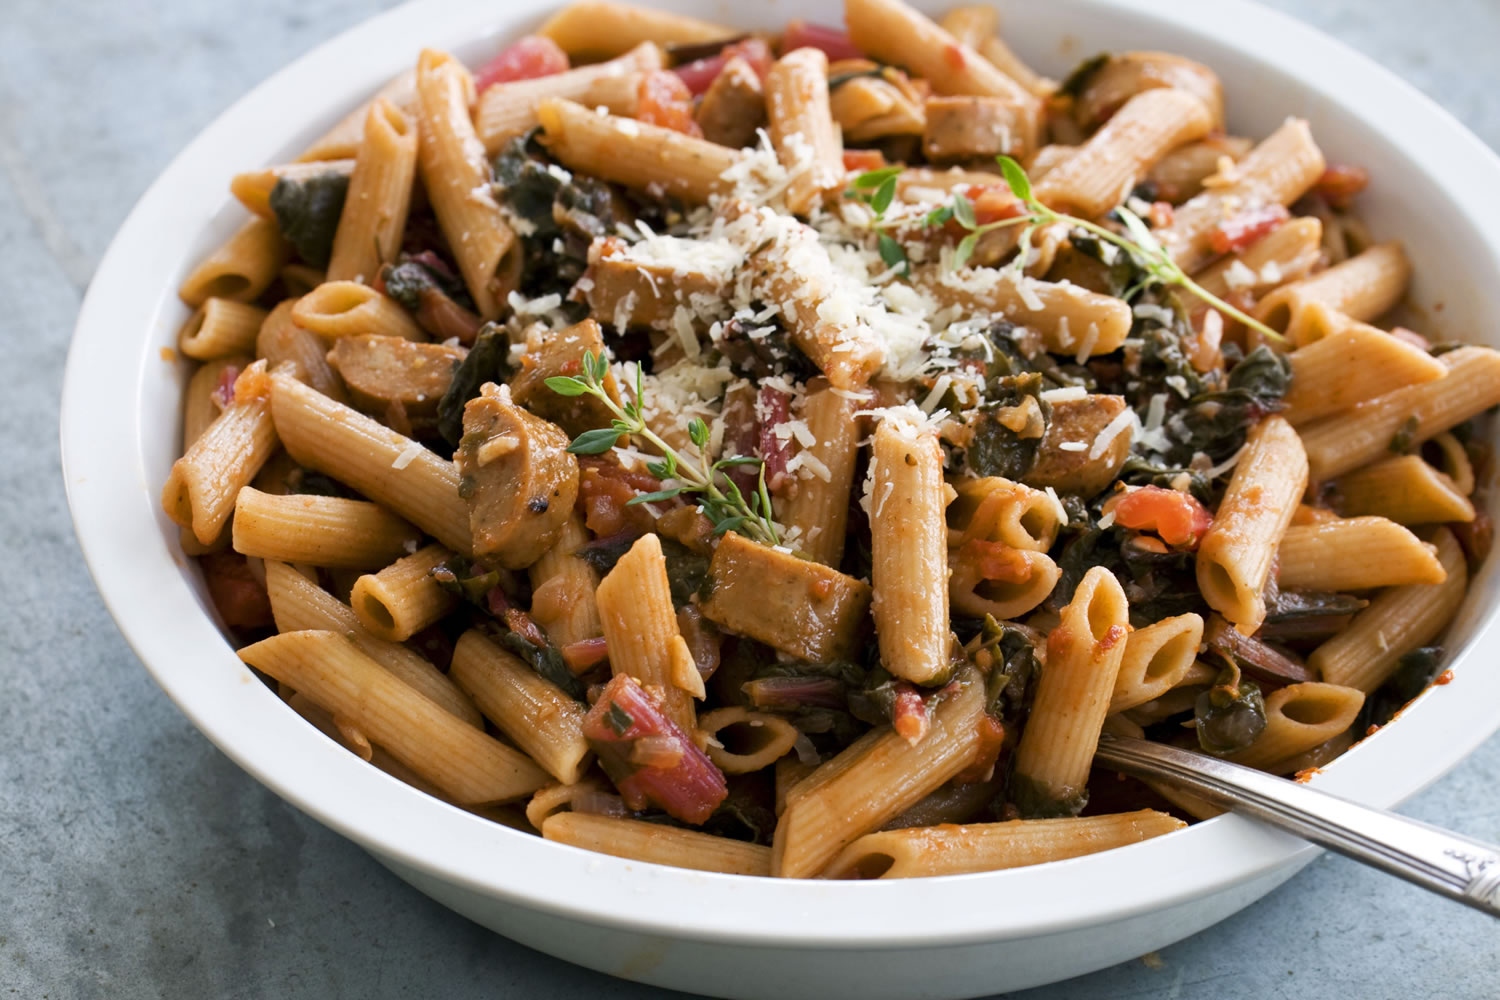 Whole-Wheat Penne With Spring Greens and Sausage